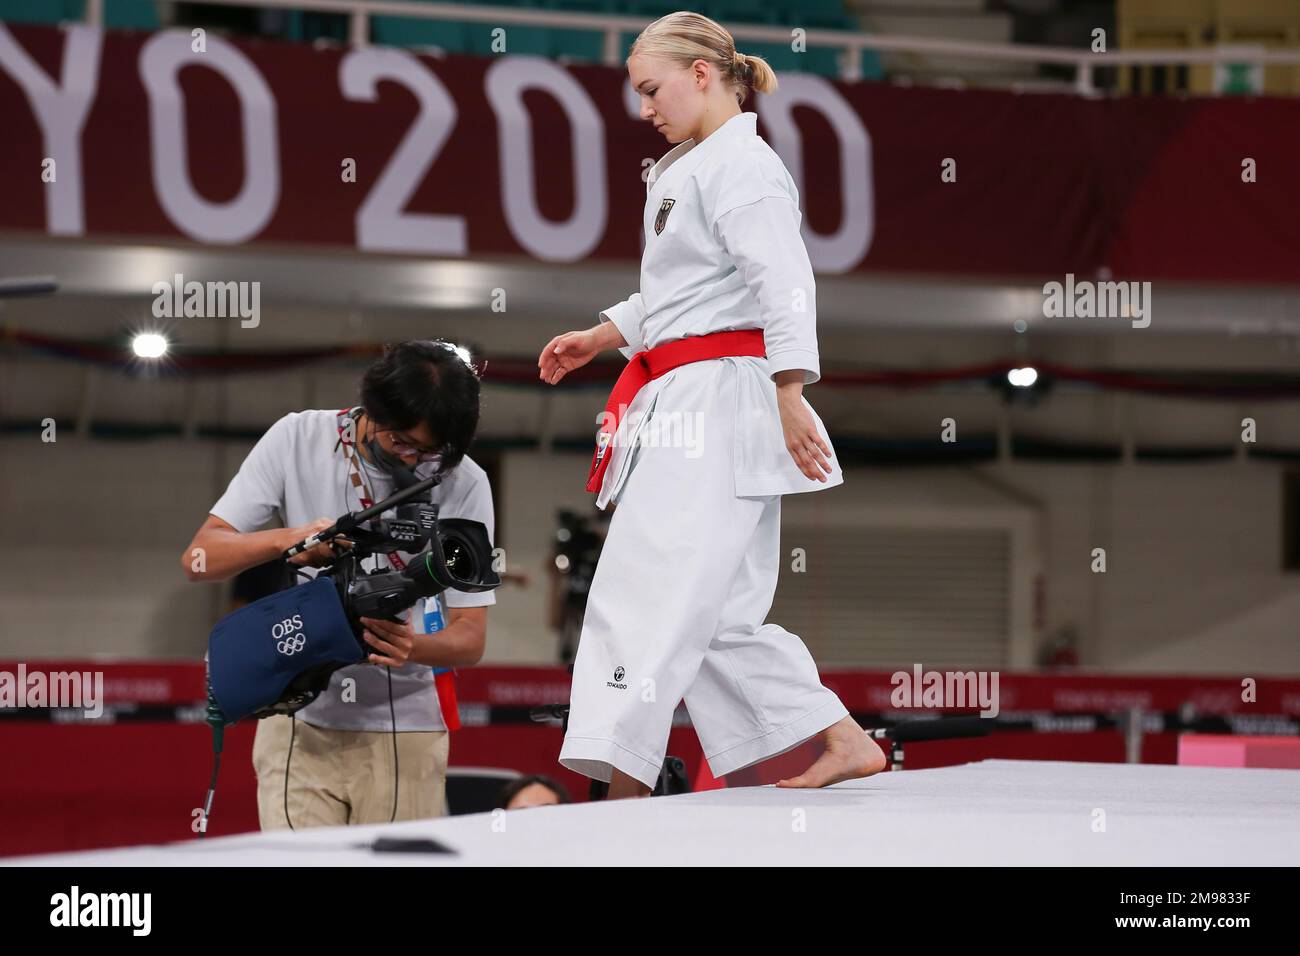 AUG 5, 2021 - TOKYO, JAPAN: Jasmine Jüttner of Germany about to make History by becoming the very first Karateka at the Olympics by competing in the Women's Kata Elimination Round at the Tokyo 2020 Olympic Games (Photo by Mickael Chavet/RX) Stock Photo